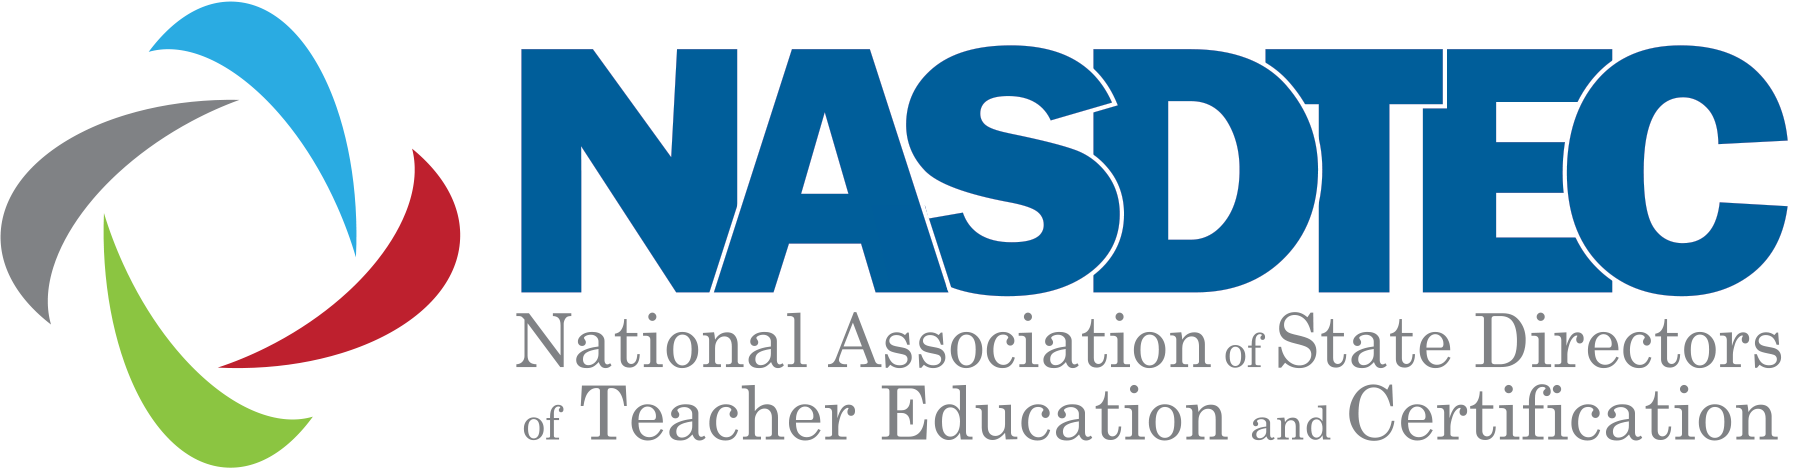 National Association of State Directors of Teacher Education and Certification logo